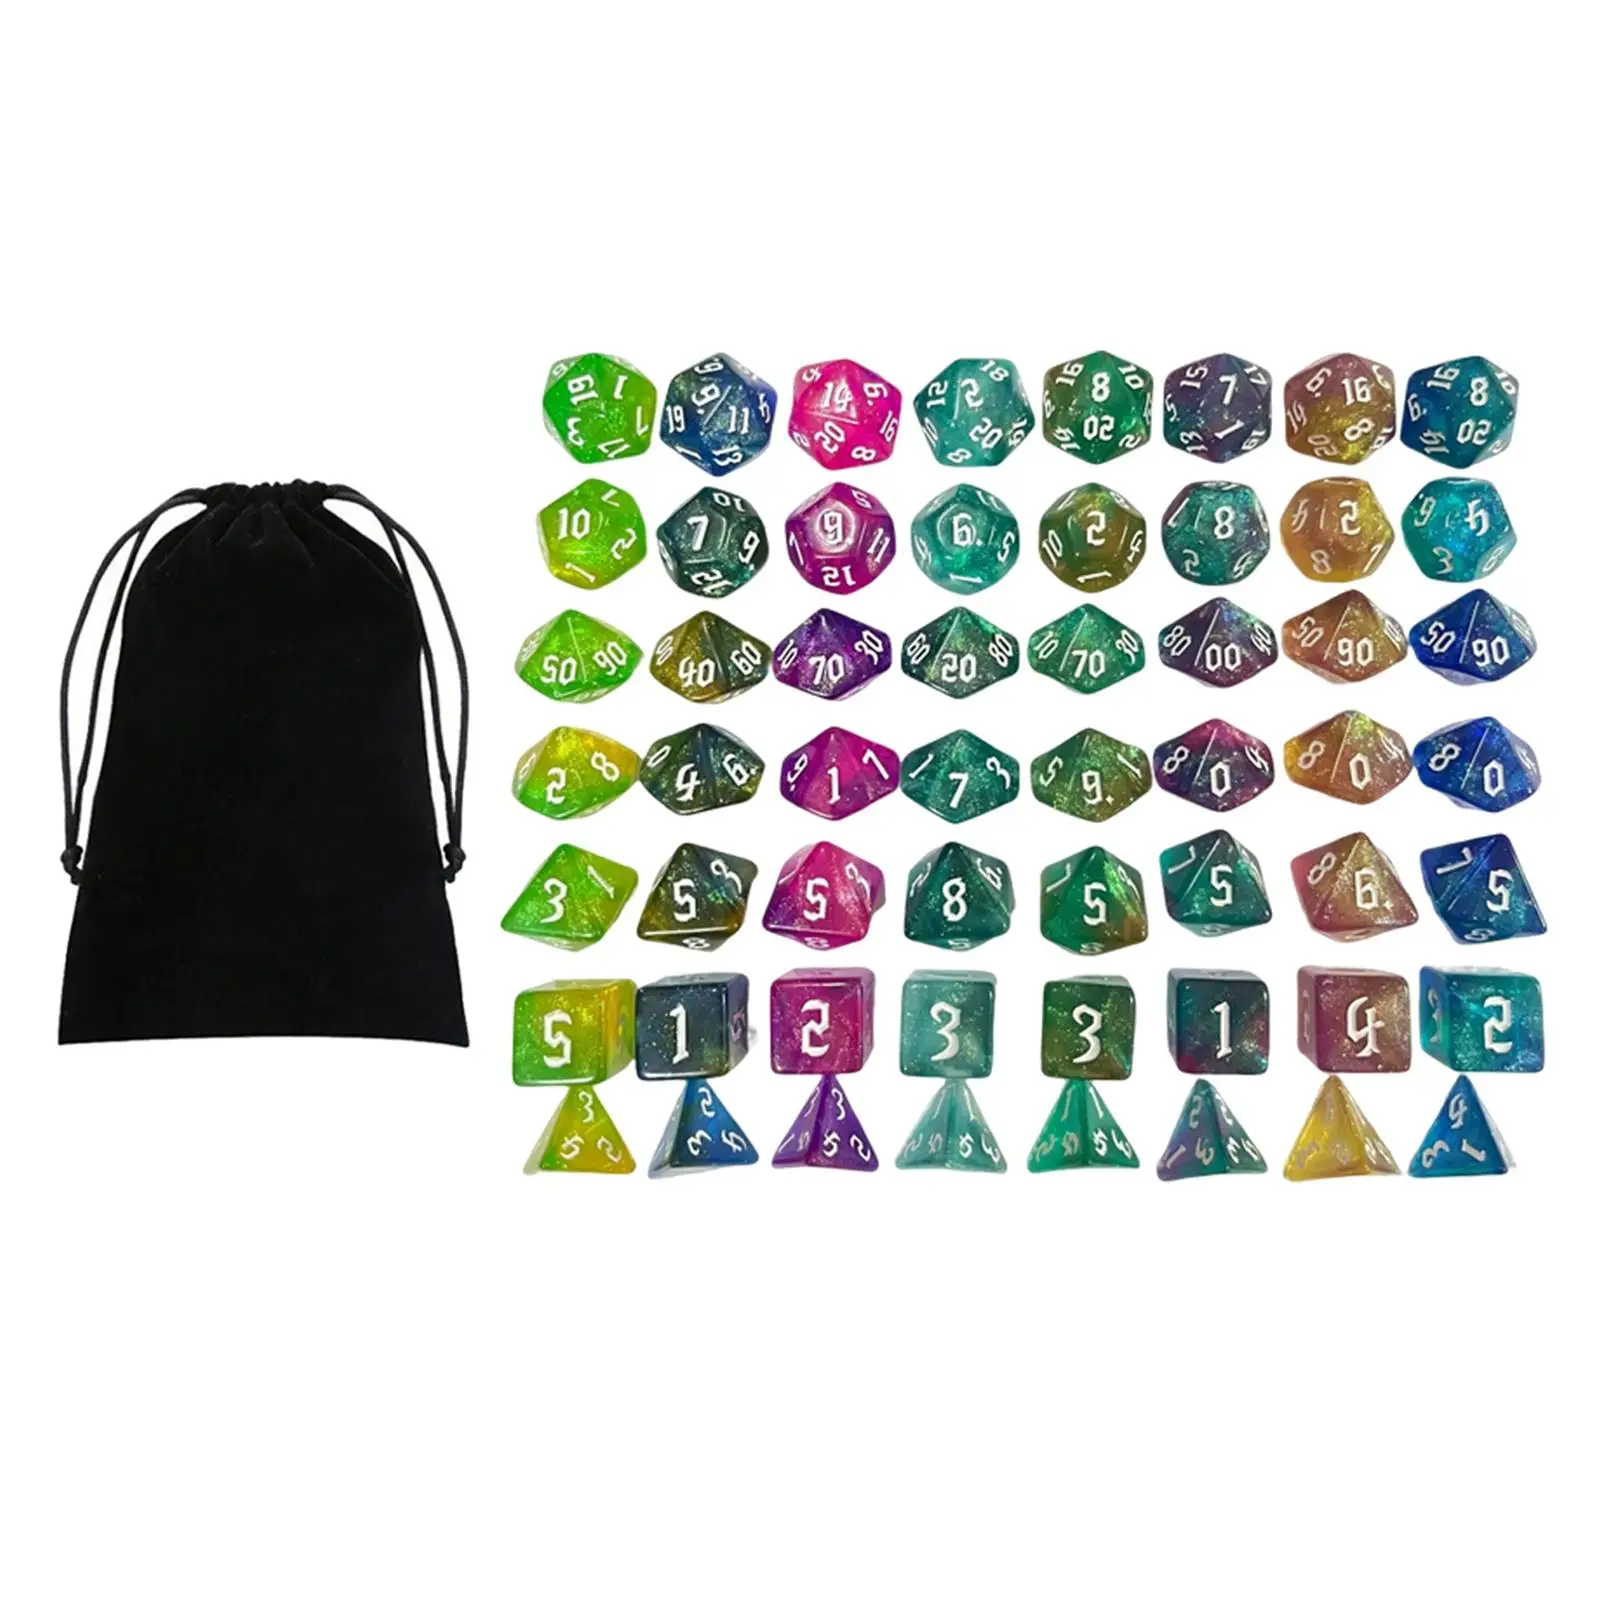 Engraved Polyhedral Dices Set Entertainment Toy 56x Game Dices Rolling Dices for Board Game Props KTV Roll Playing Games Parties